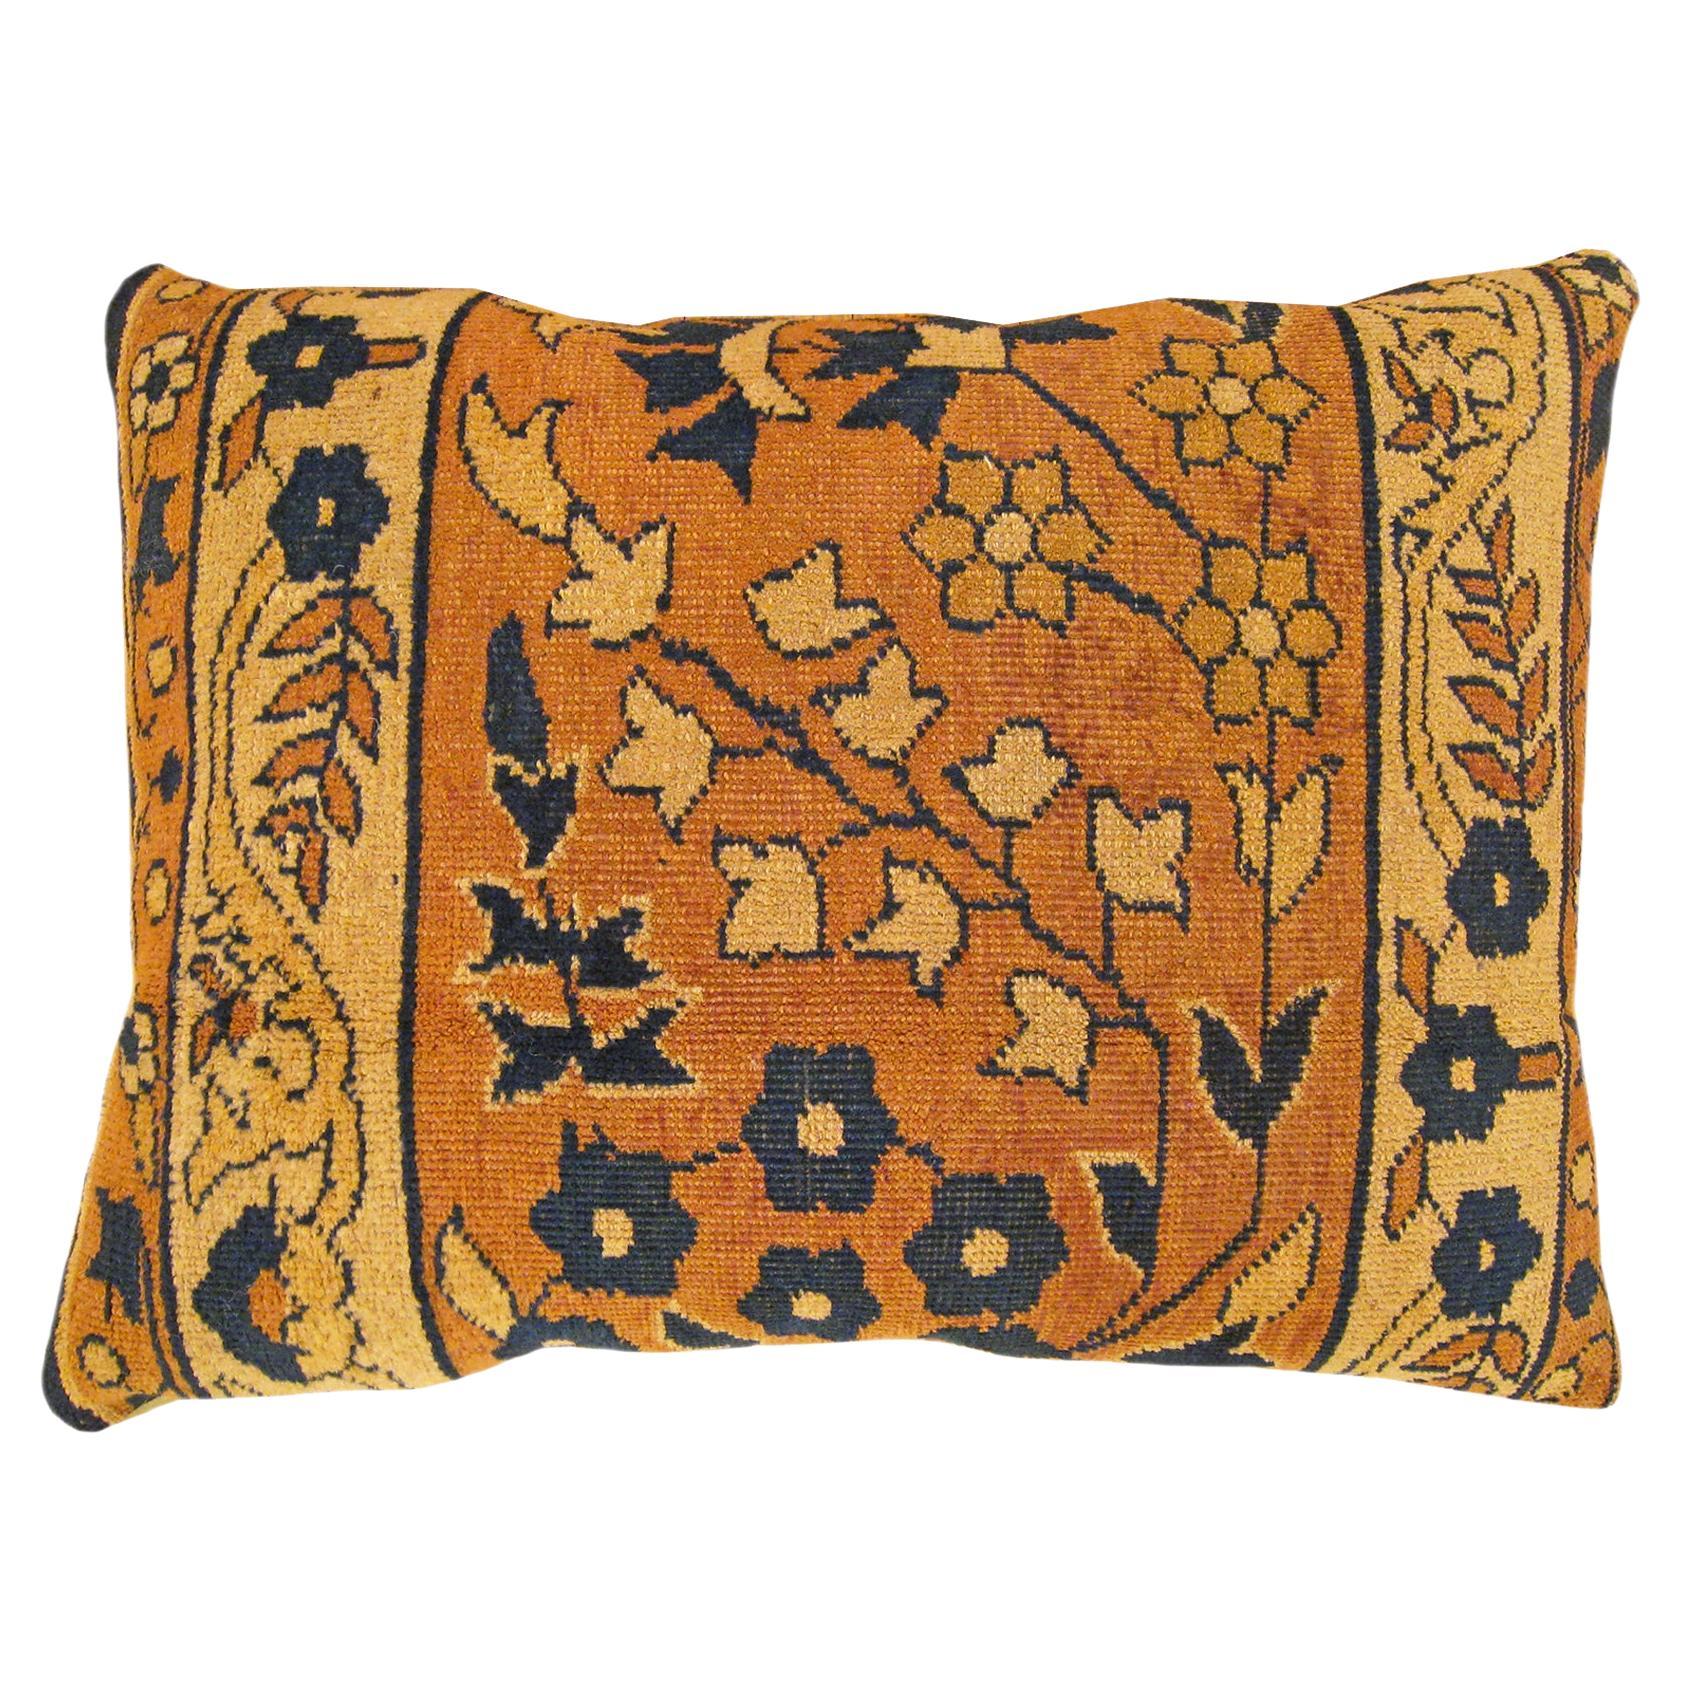  Decorative Antique Indian Agra Rug Pillow with Floral Elements Allover